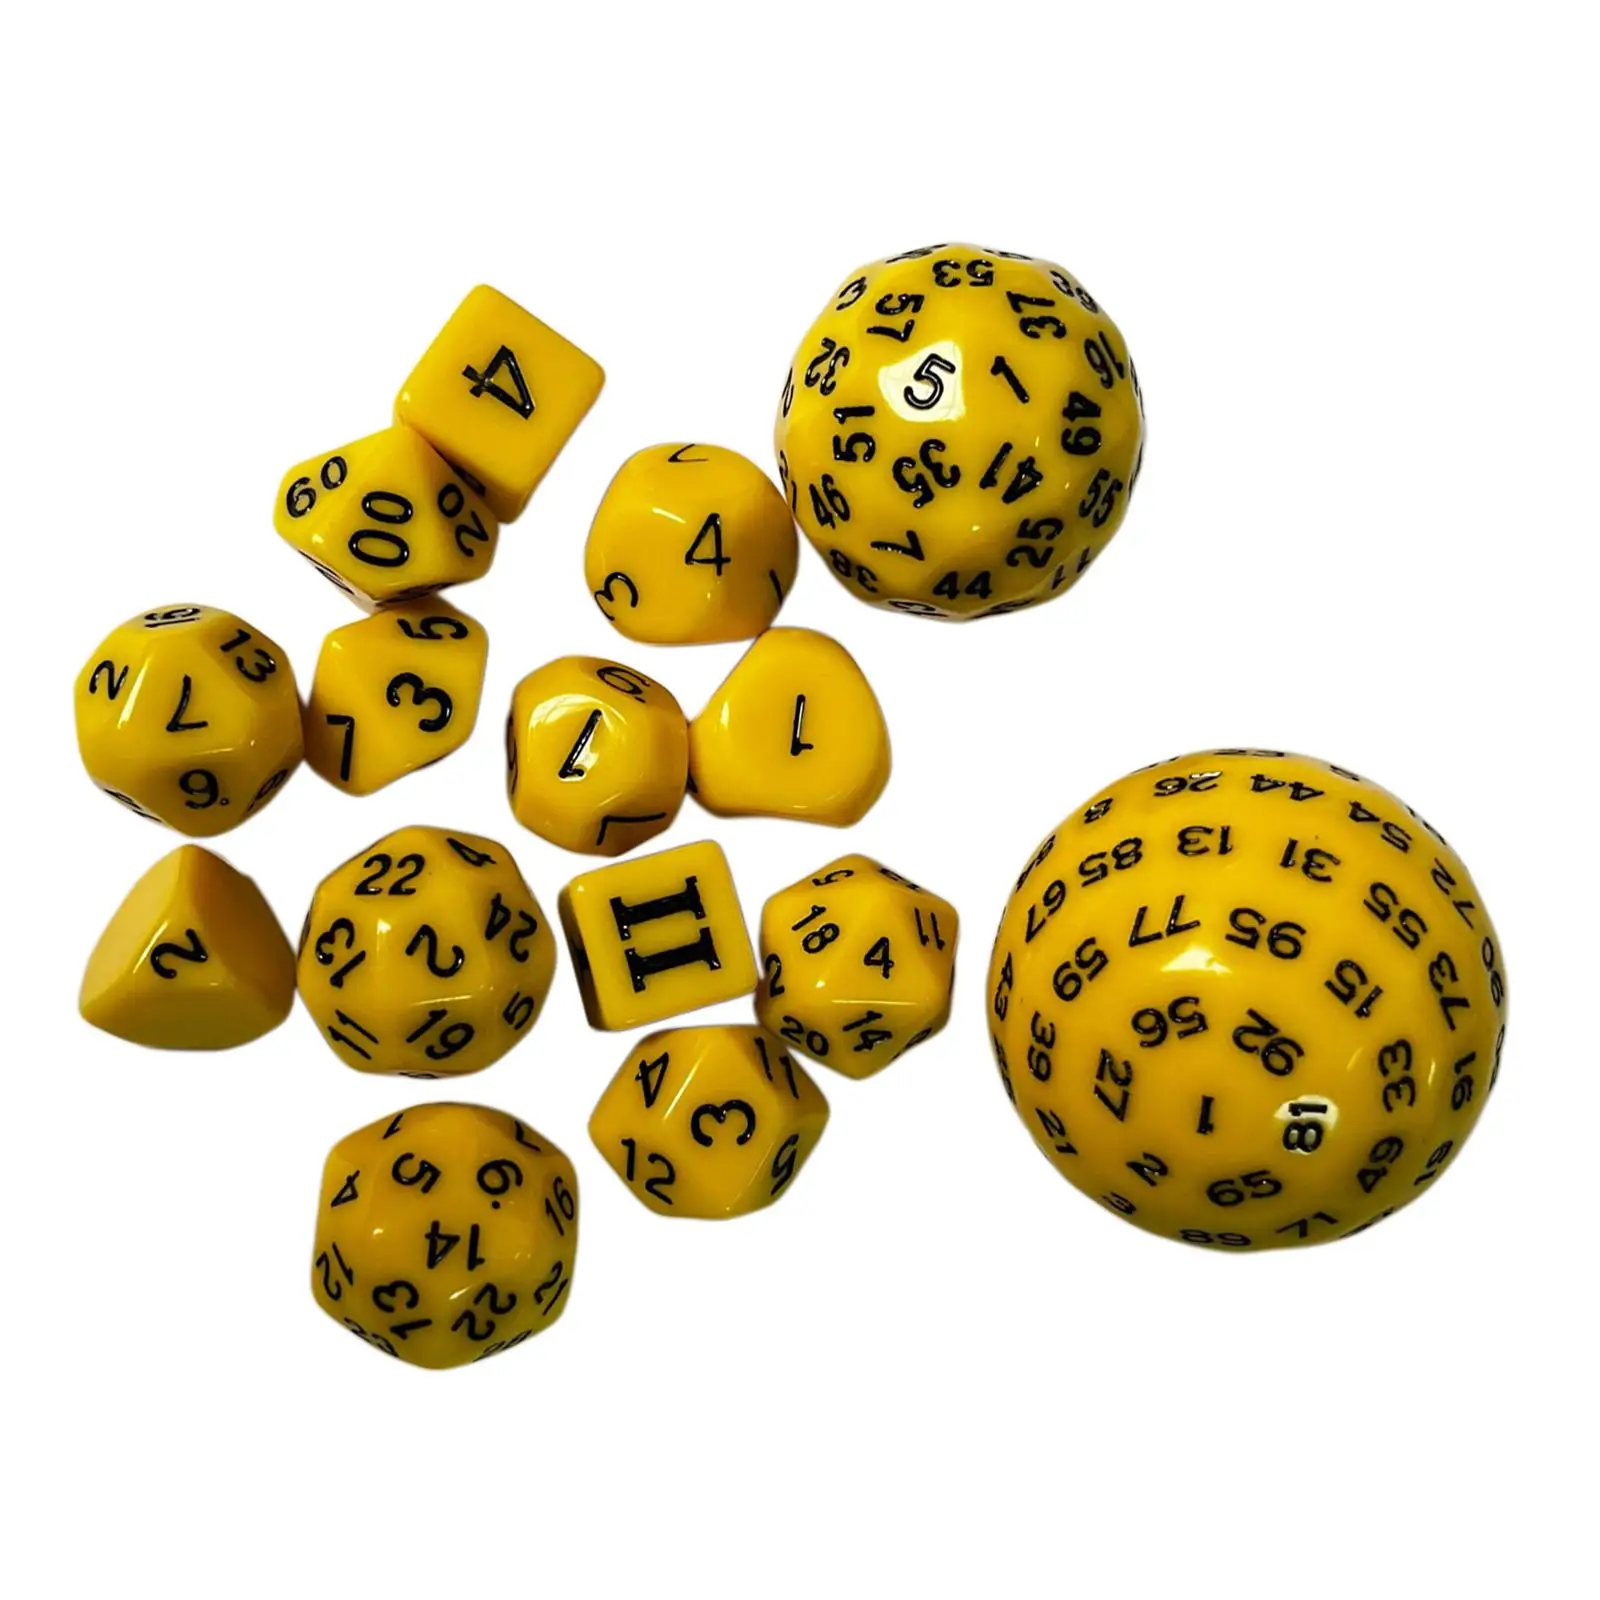 15x Dice Set D100 D60 D30 D24 D20 D16 D12 D10 D8 D7 D5 D4 RPG Role Playing Acrylic Polyhedral Dice Set for Entertainment